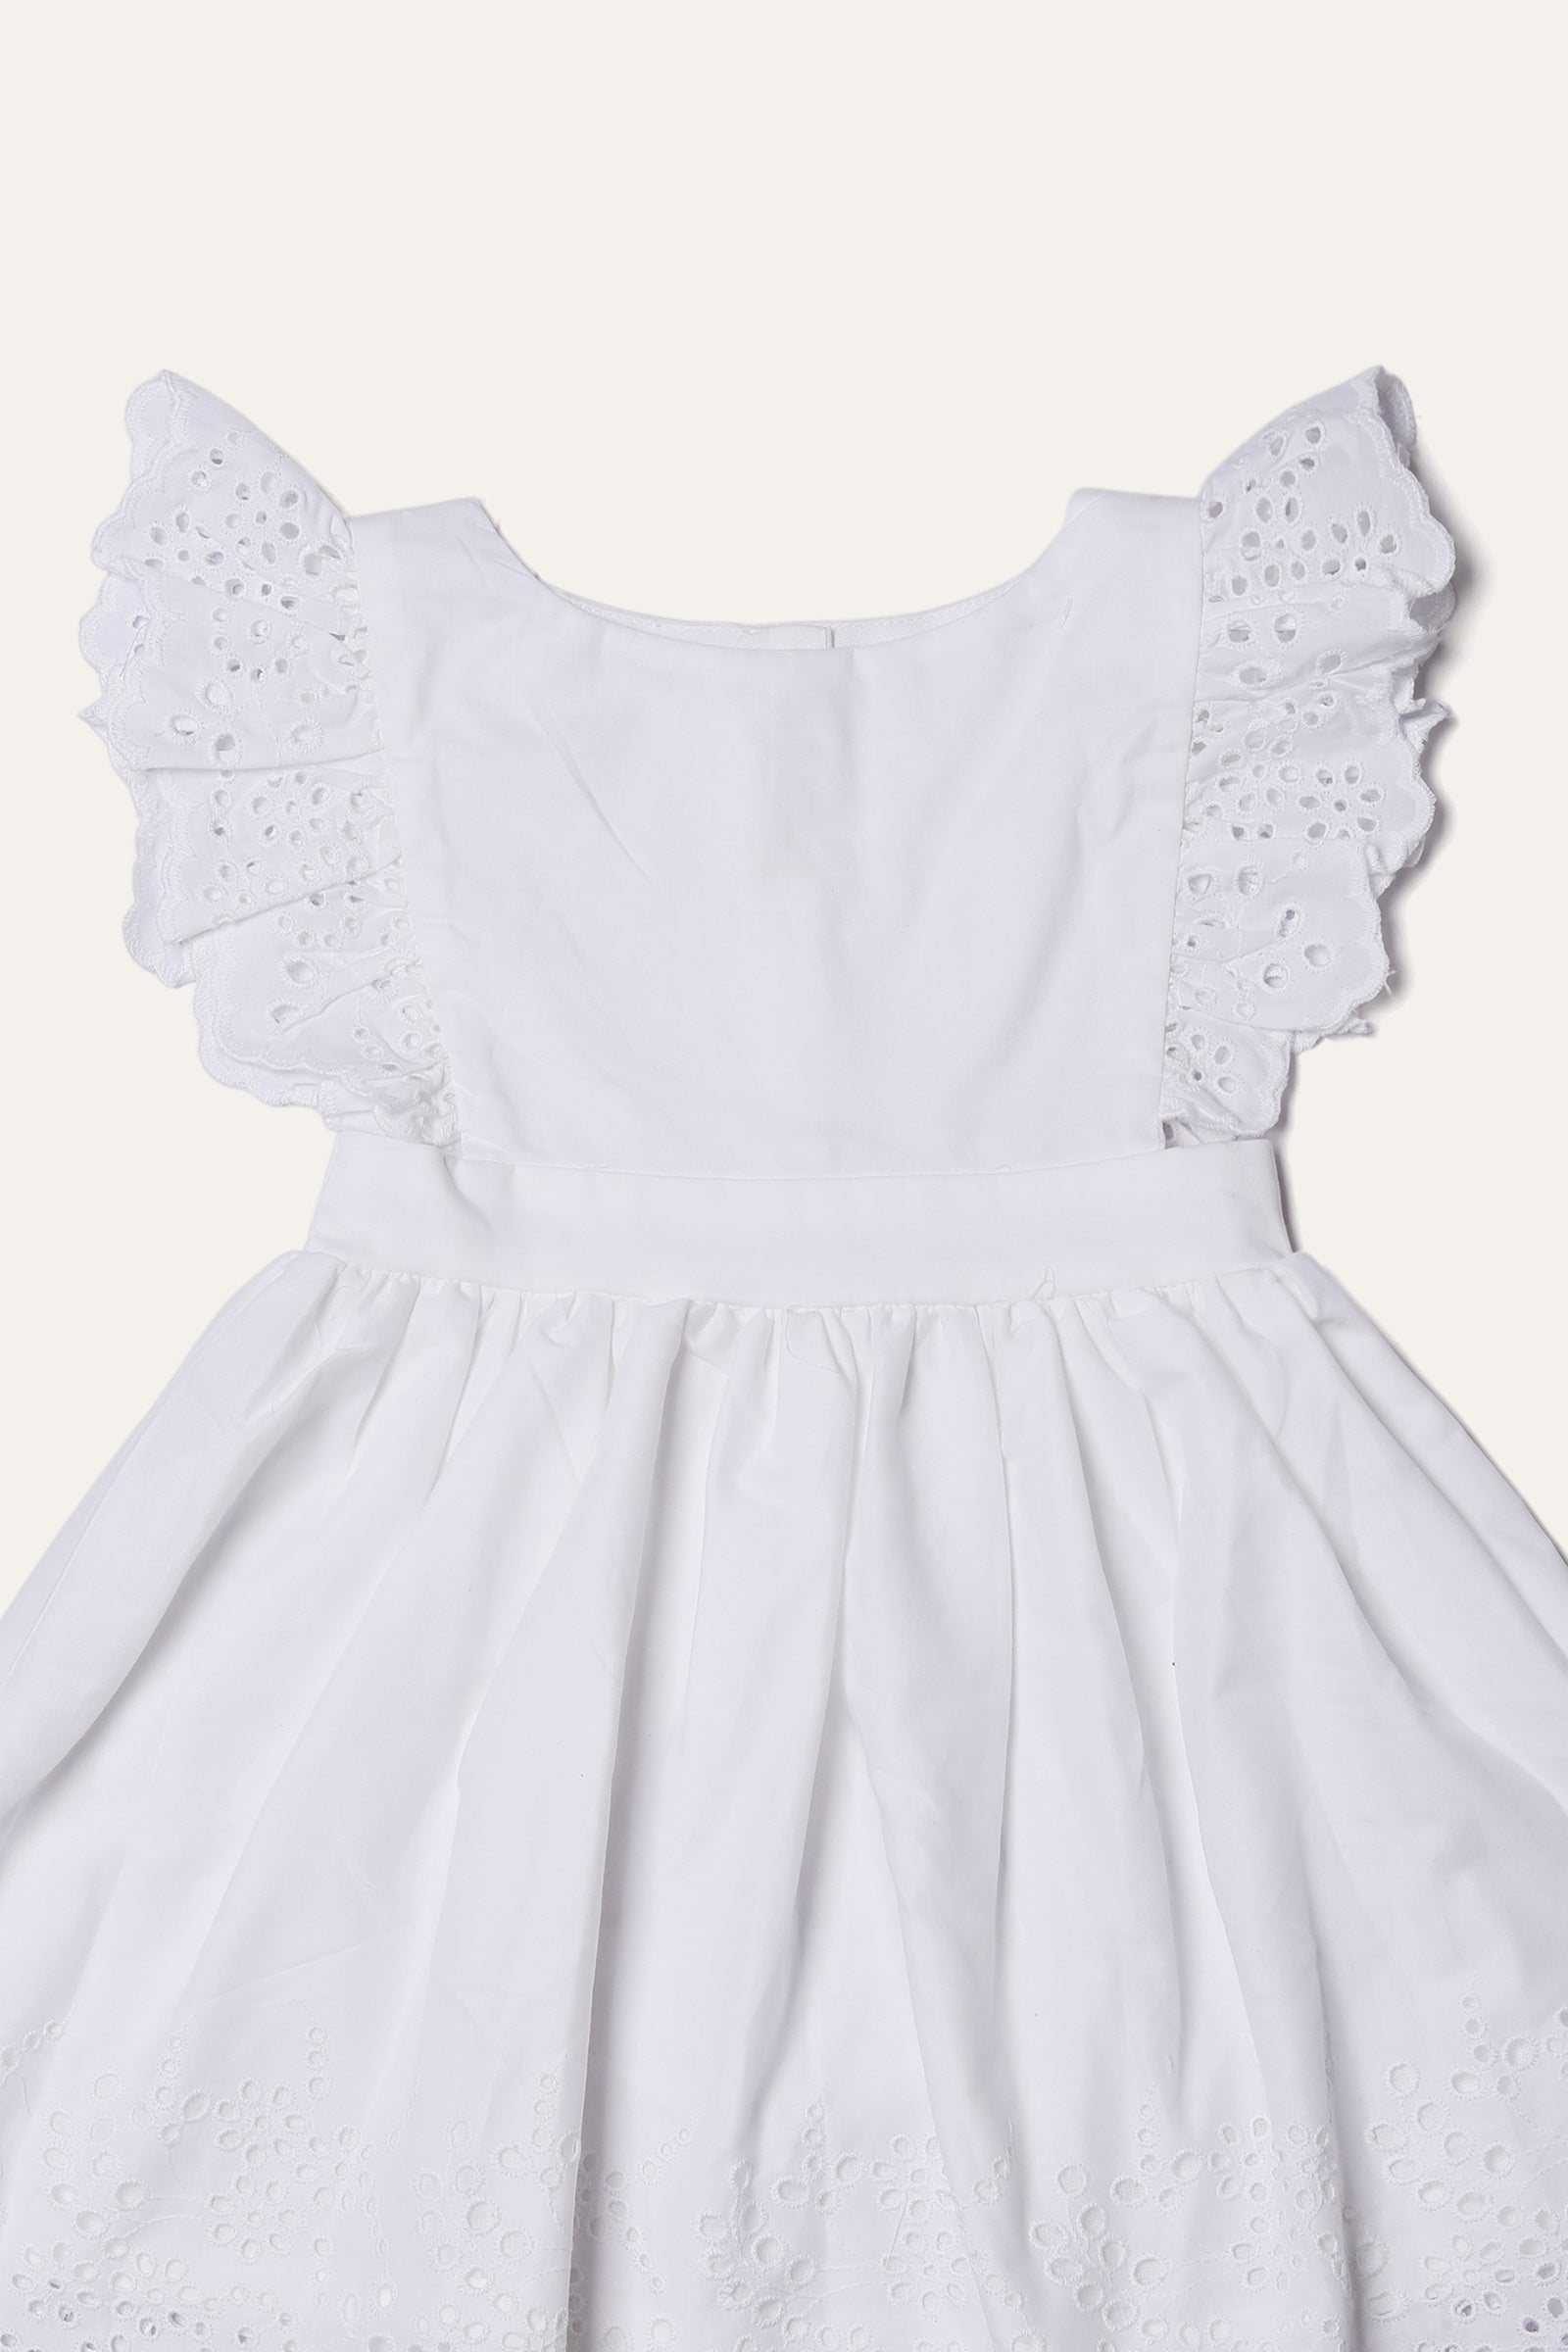 Embroidered Frock with Diaper Cover (IF-380)